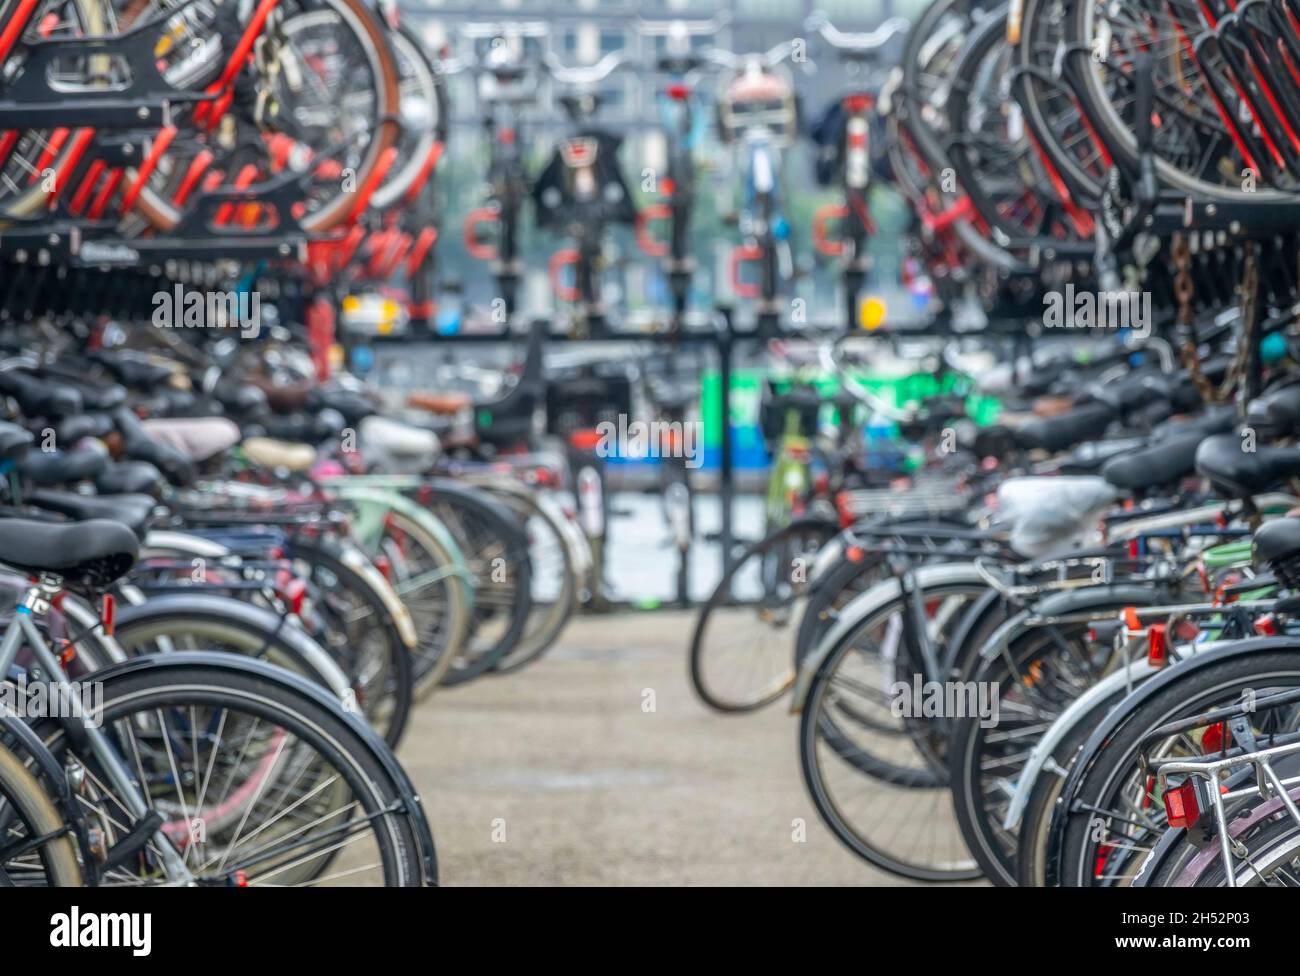 Netherlands. A day in Amsterdam. Two-level bicycle parking Stock Photo